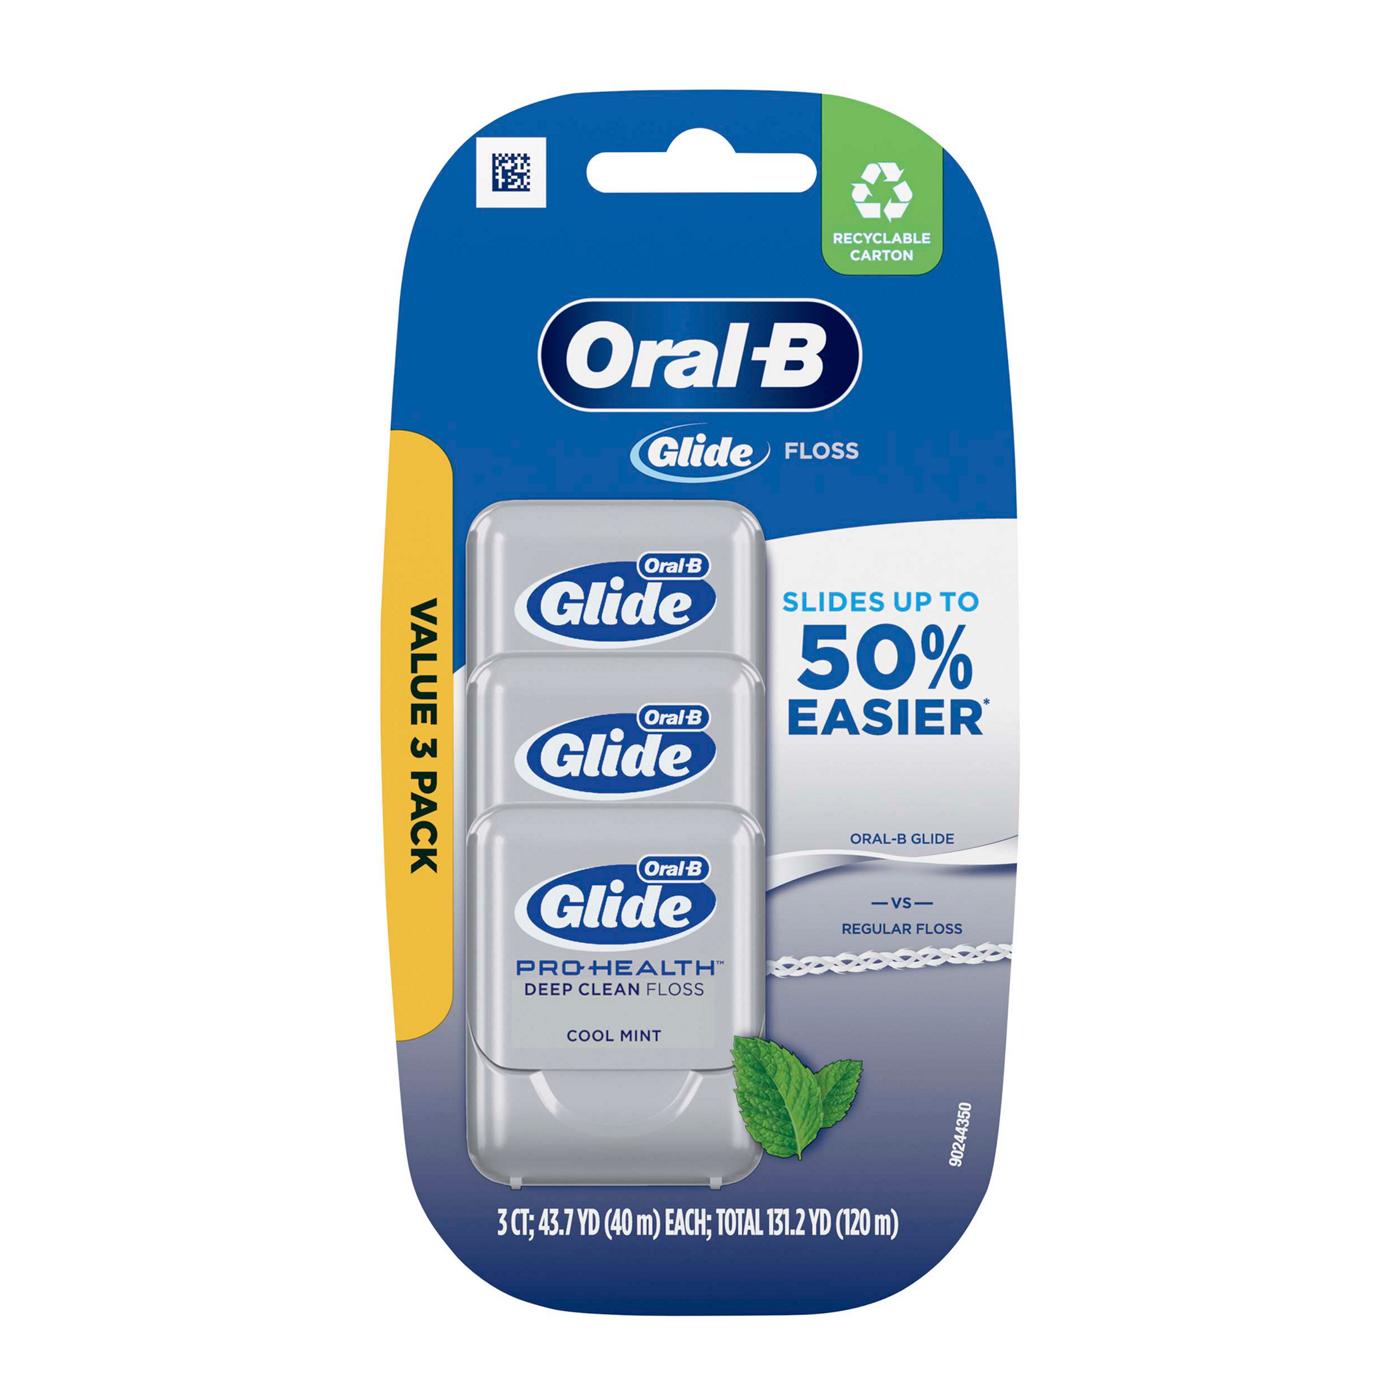 Oral-B Glide Pro-Health Deep Clean Floss - Mint; image 1 of 3